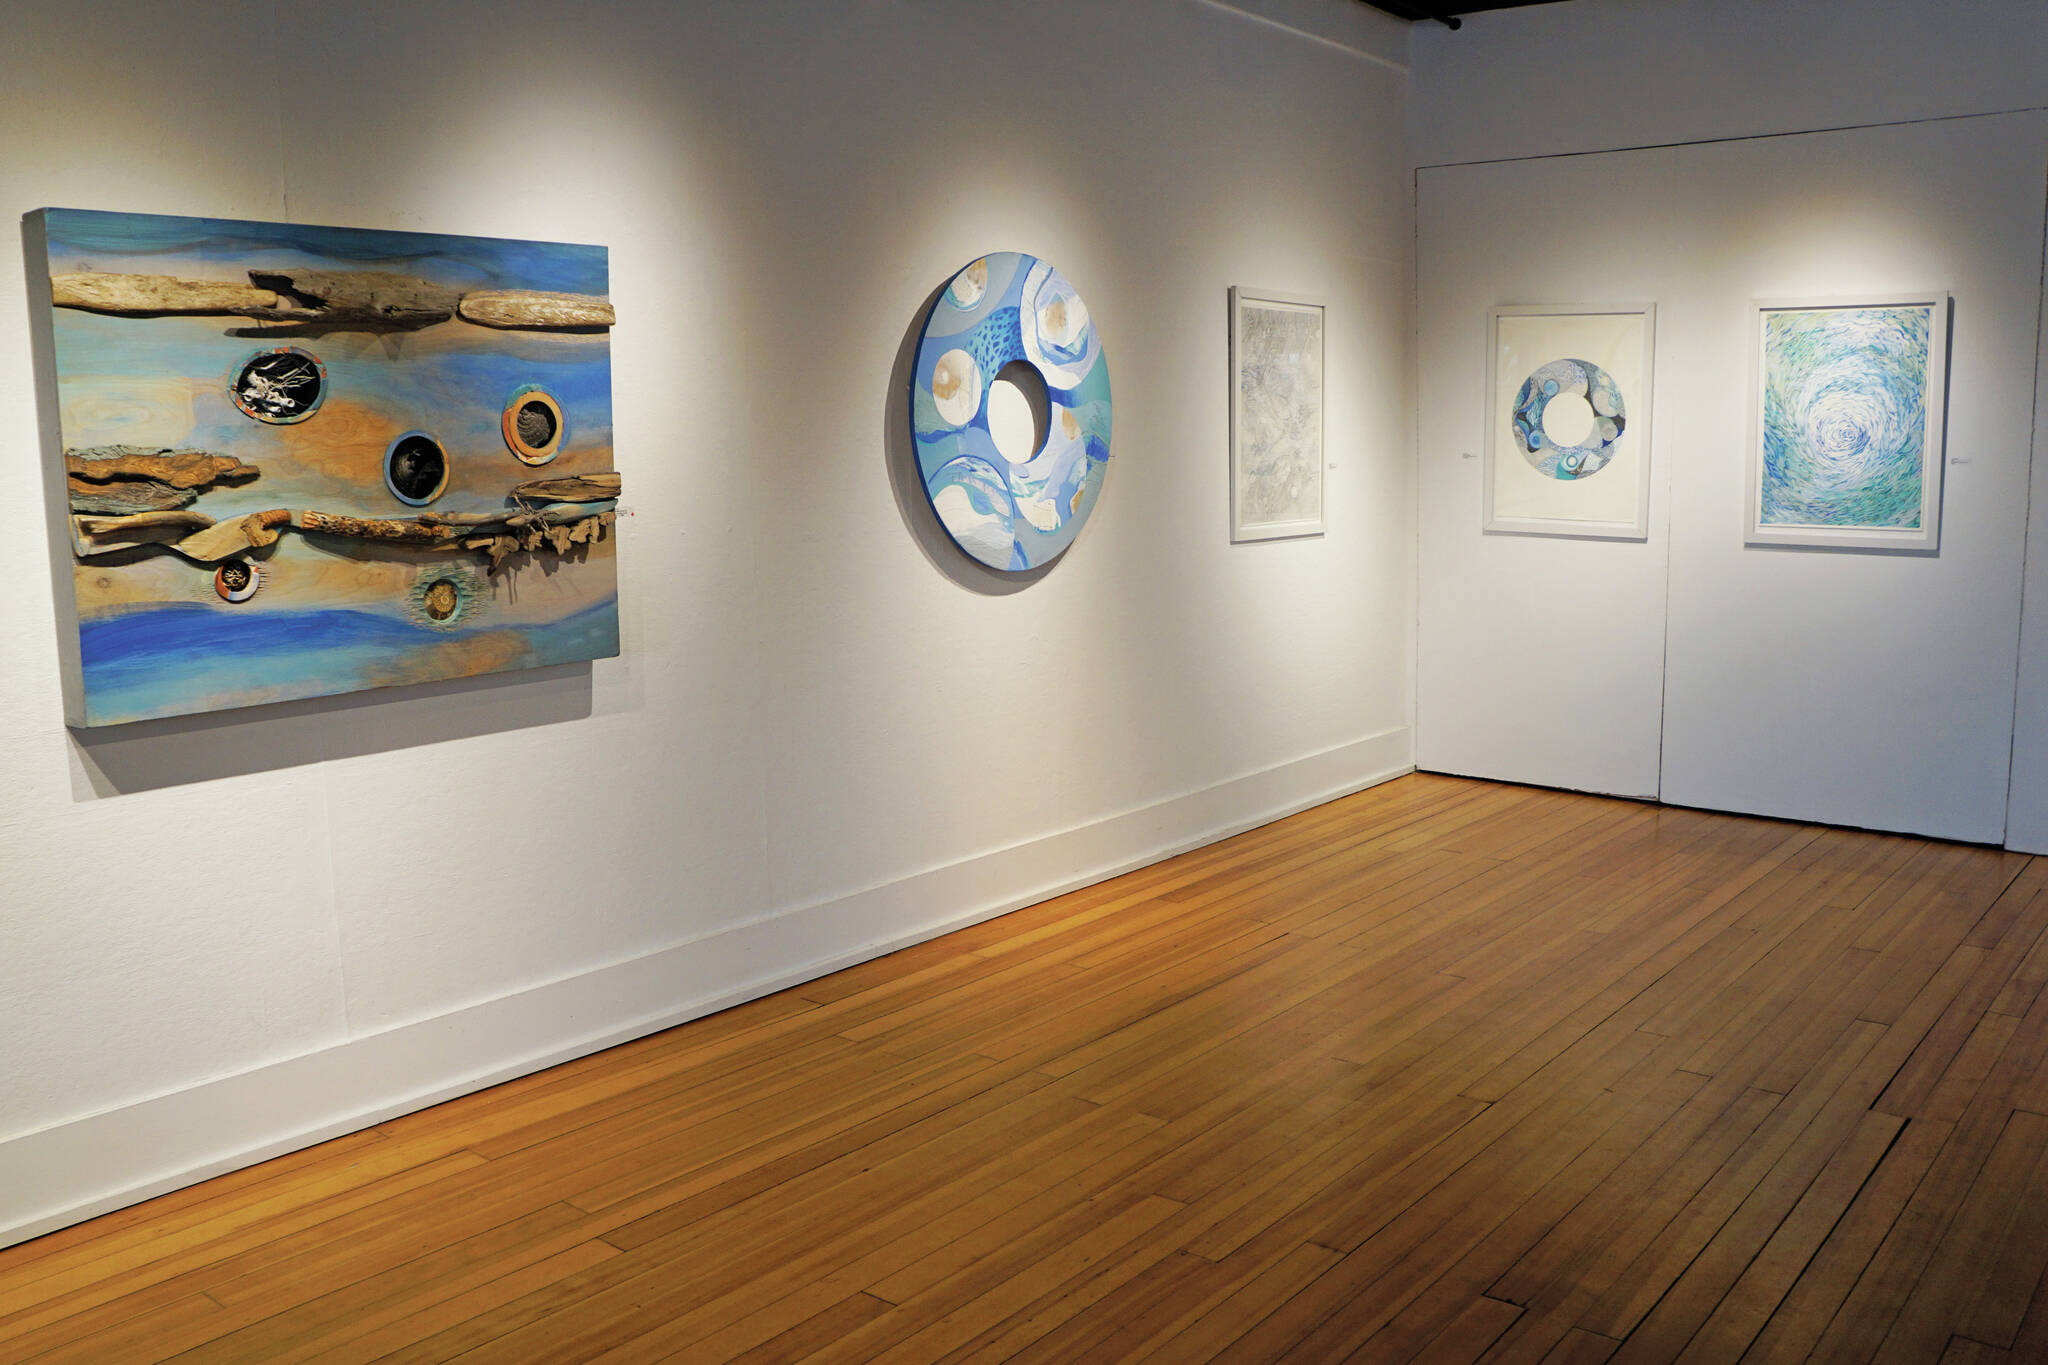 Photo by Michael Armstrong/Homer News 
A corner of Don Decker’s exhibit, Thin Ice, showing through February at Bunnell Street Arts Center in Homer, Alaska.